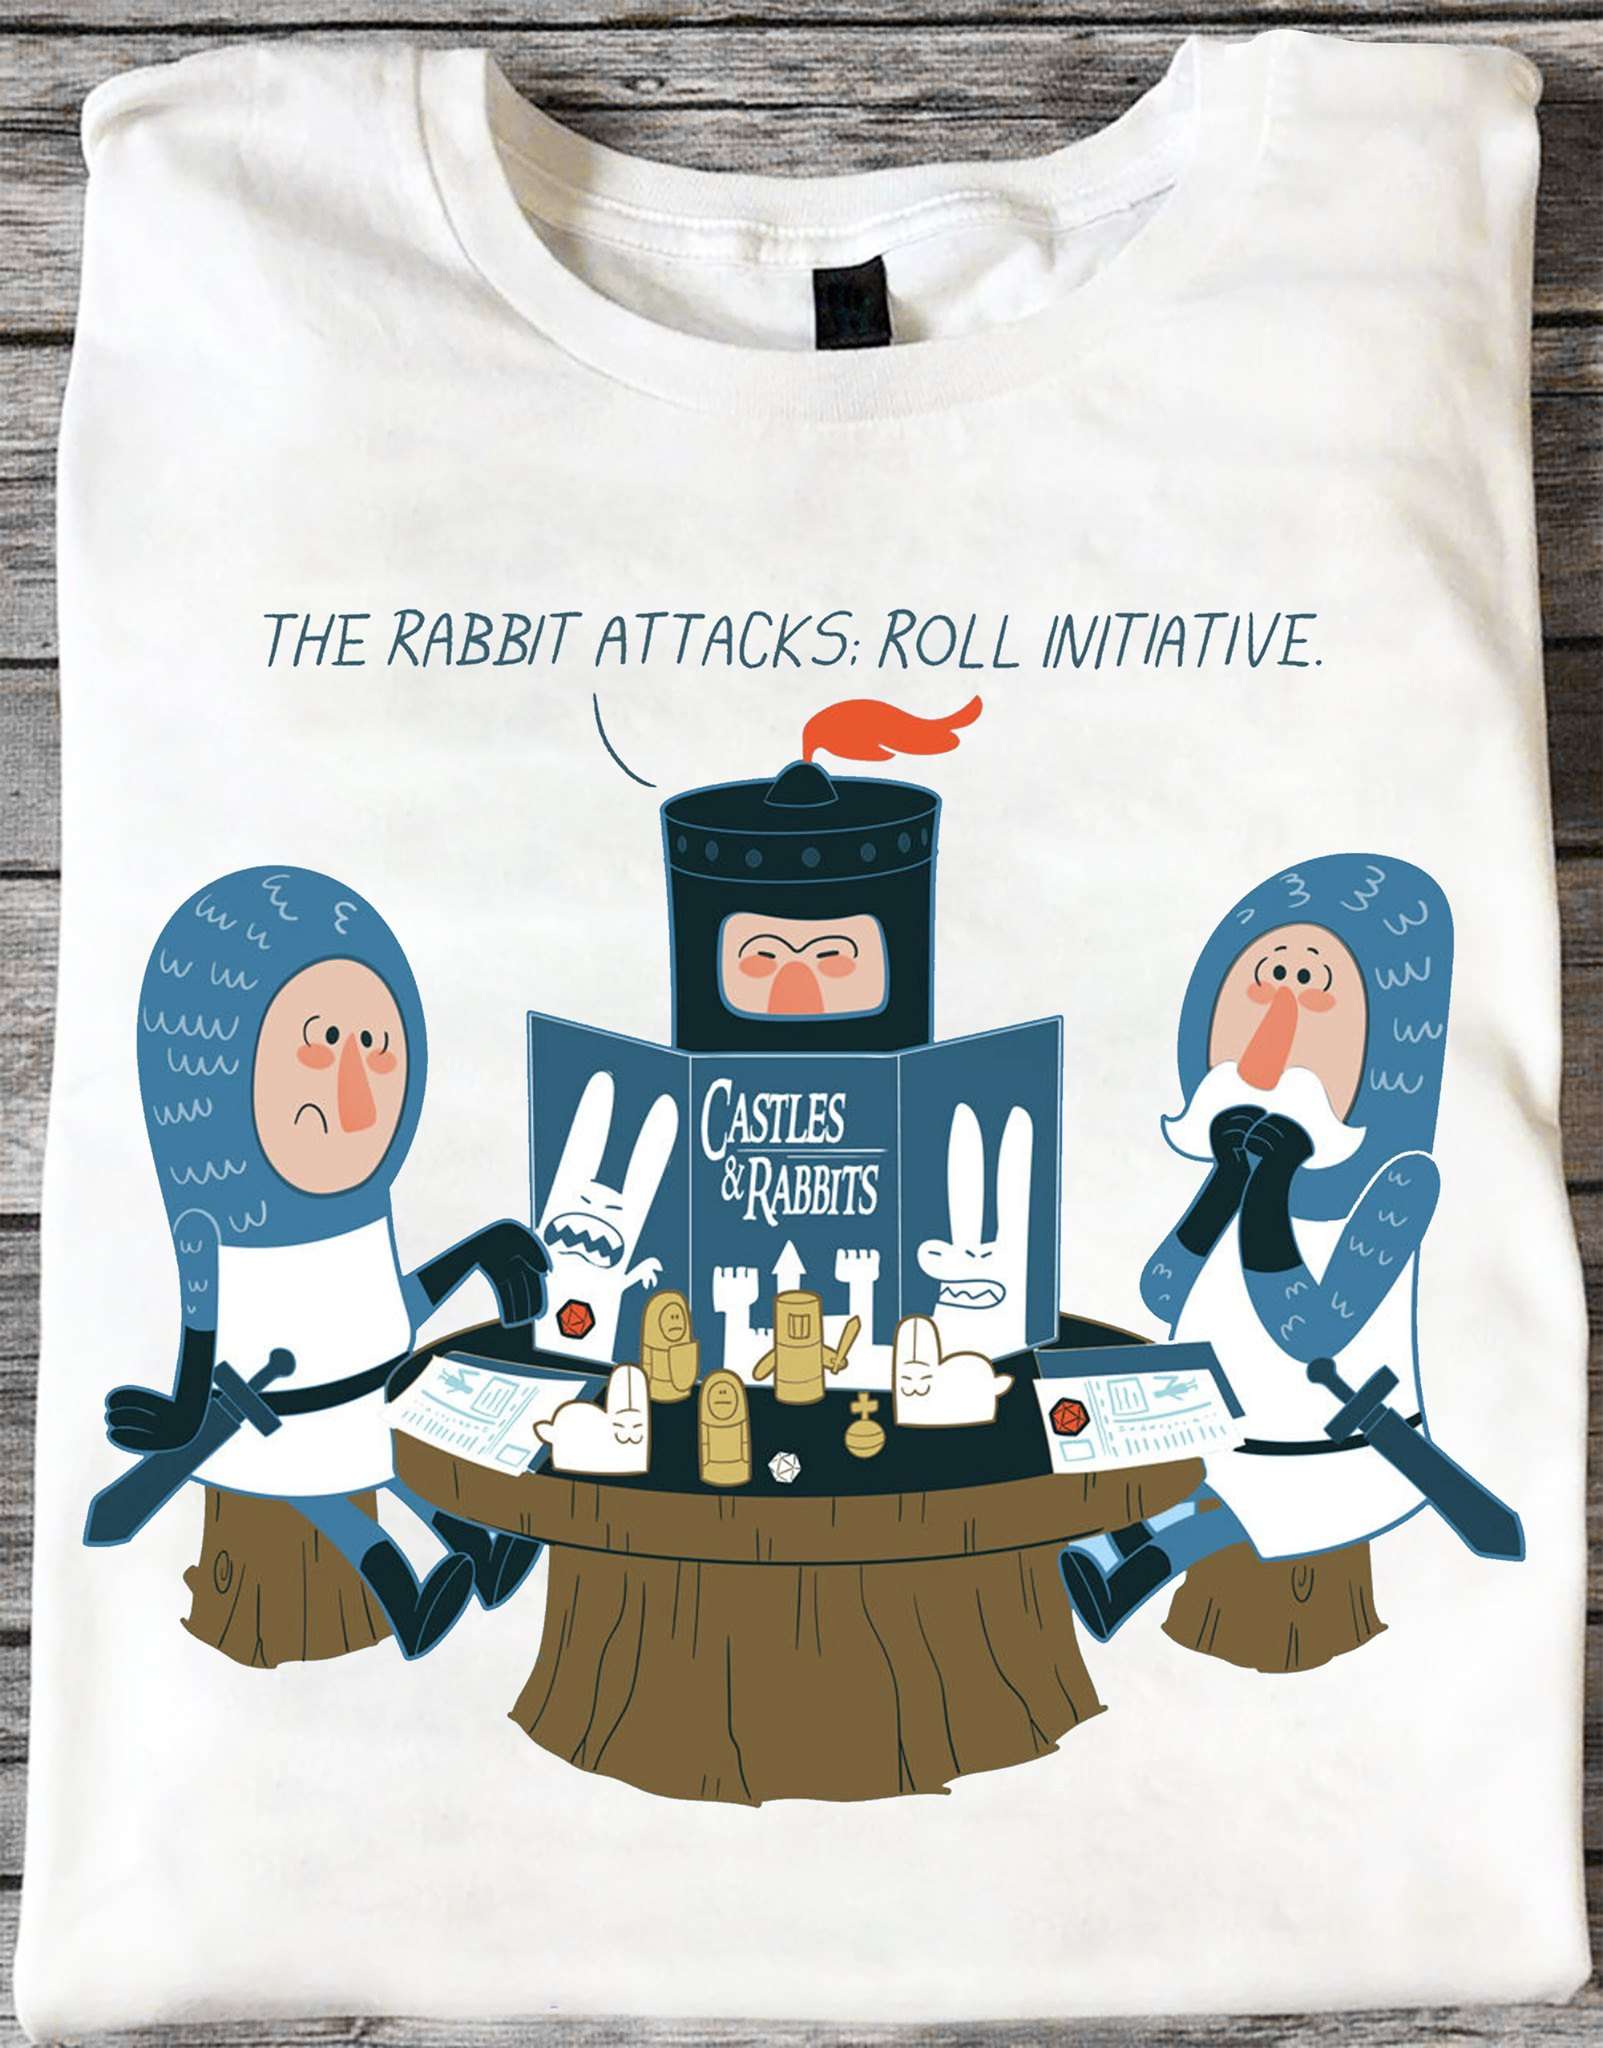 The rabbit attacks, roll initiative - Castles and rabbits